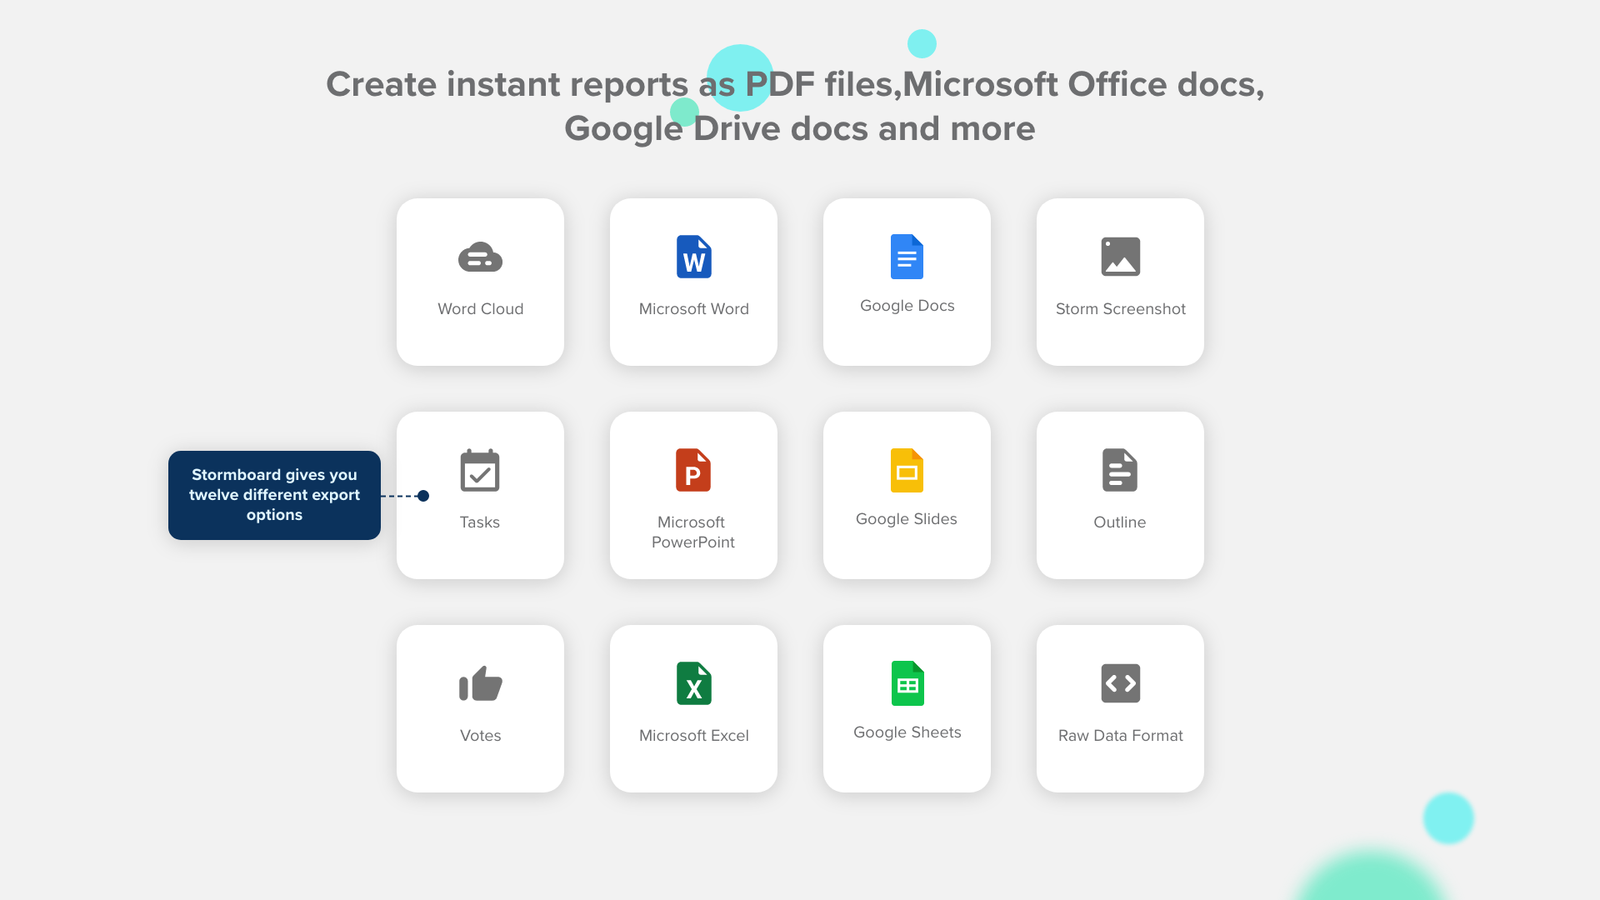 Stormboard Software - Create instant reports as PDF files, Microsoft Office docs, Google Drive docs and more